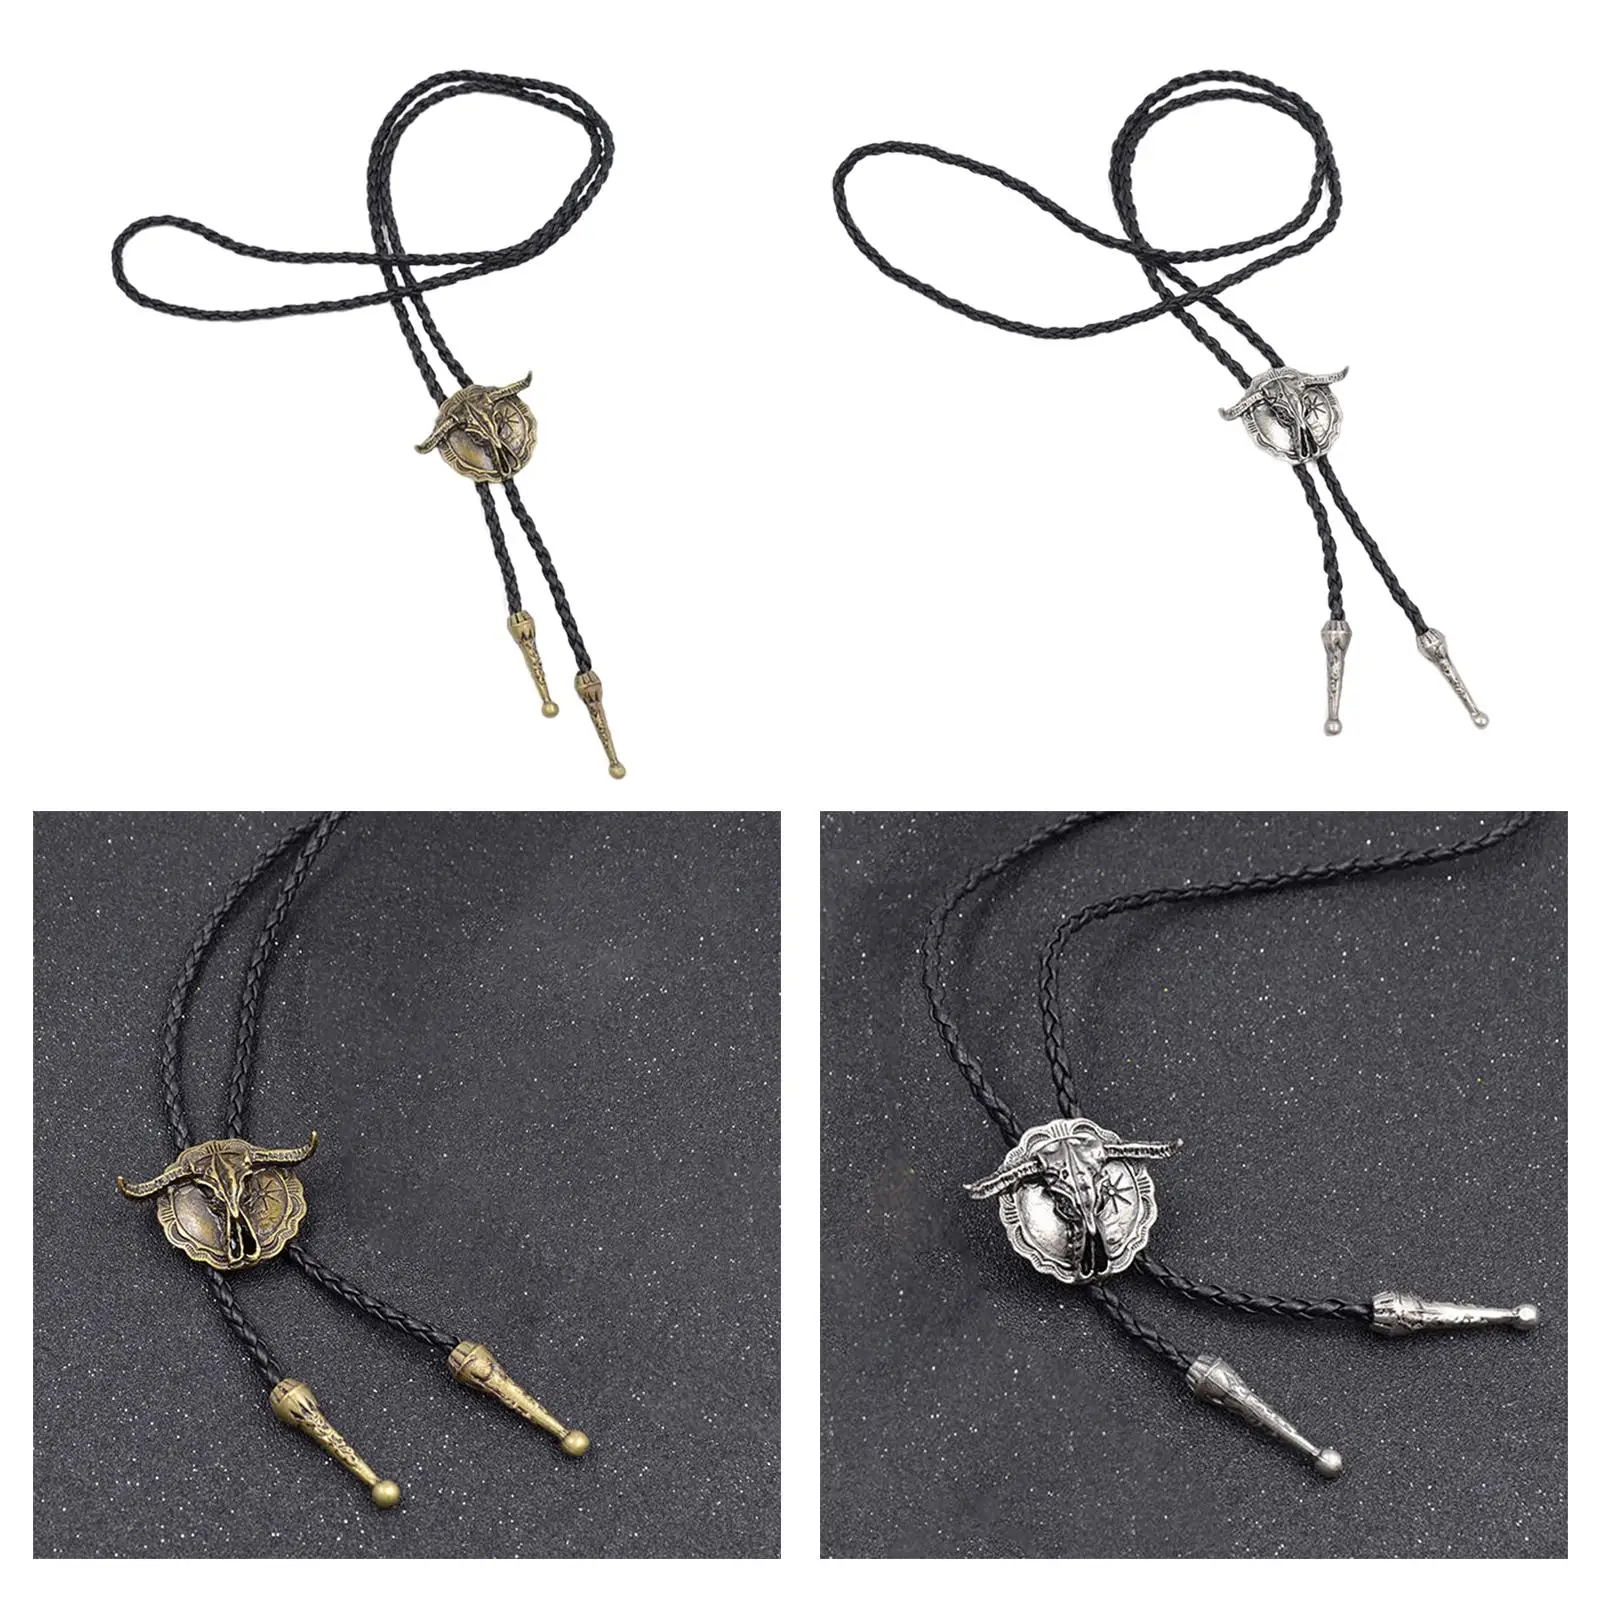 Bolo Tie with Hand Braided Lanyard Special Apparel Accessory Durable Premium Grade Adjustable Size Trendy Style for Men Jewelry